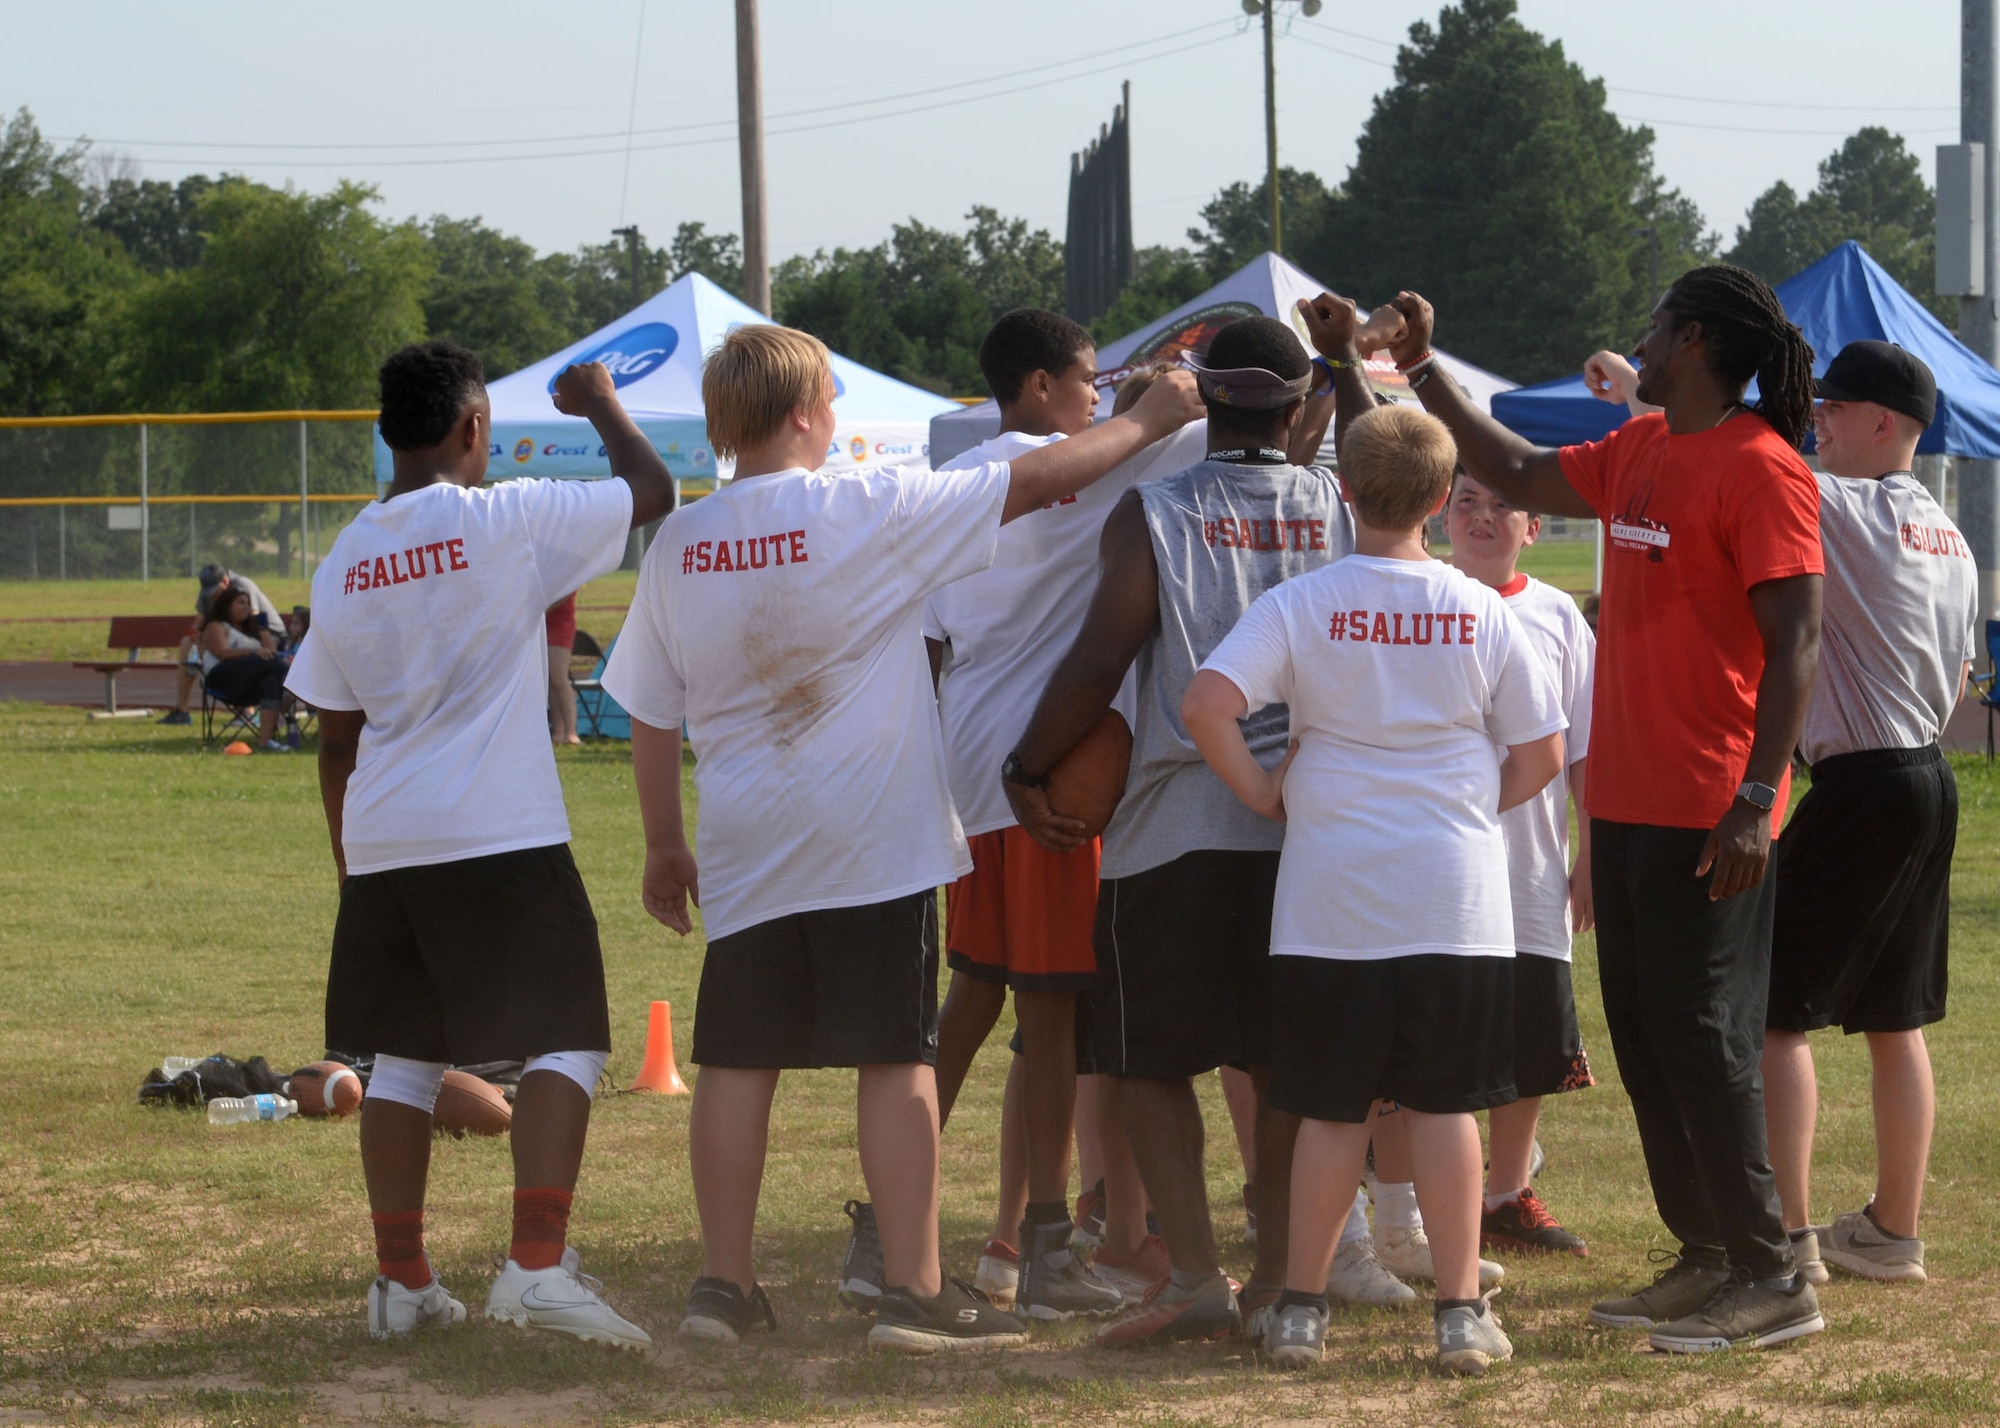 Andre Roberts, an Atlanta Falcons wide receiver and former military child, huddle up after a drill during the Proctor & Gamble Andre Roberts Football ProCamp June 16, 2017, at Little Rock Air Force Base, Arkansas. Andres Roberts worked side by side with volunteers to help teach children different football skills. (U.S. Air Force photo by Airman 1st Class Codie Collins)